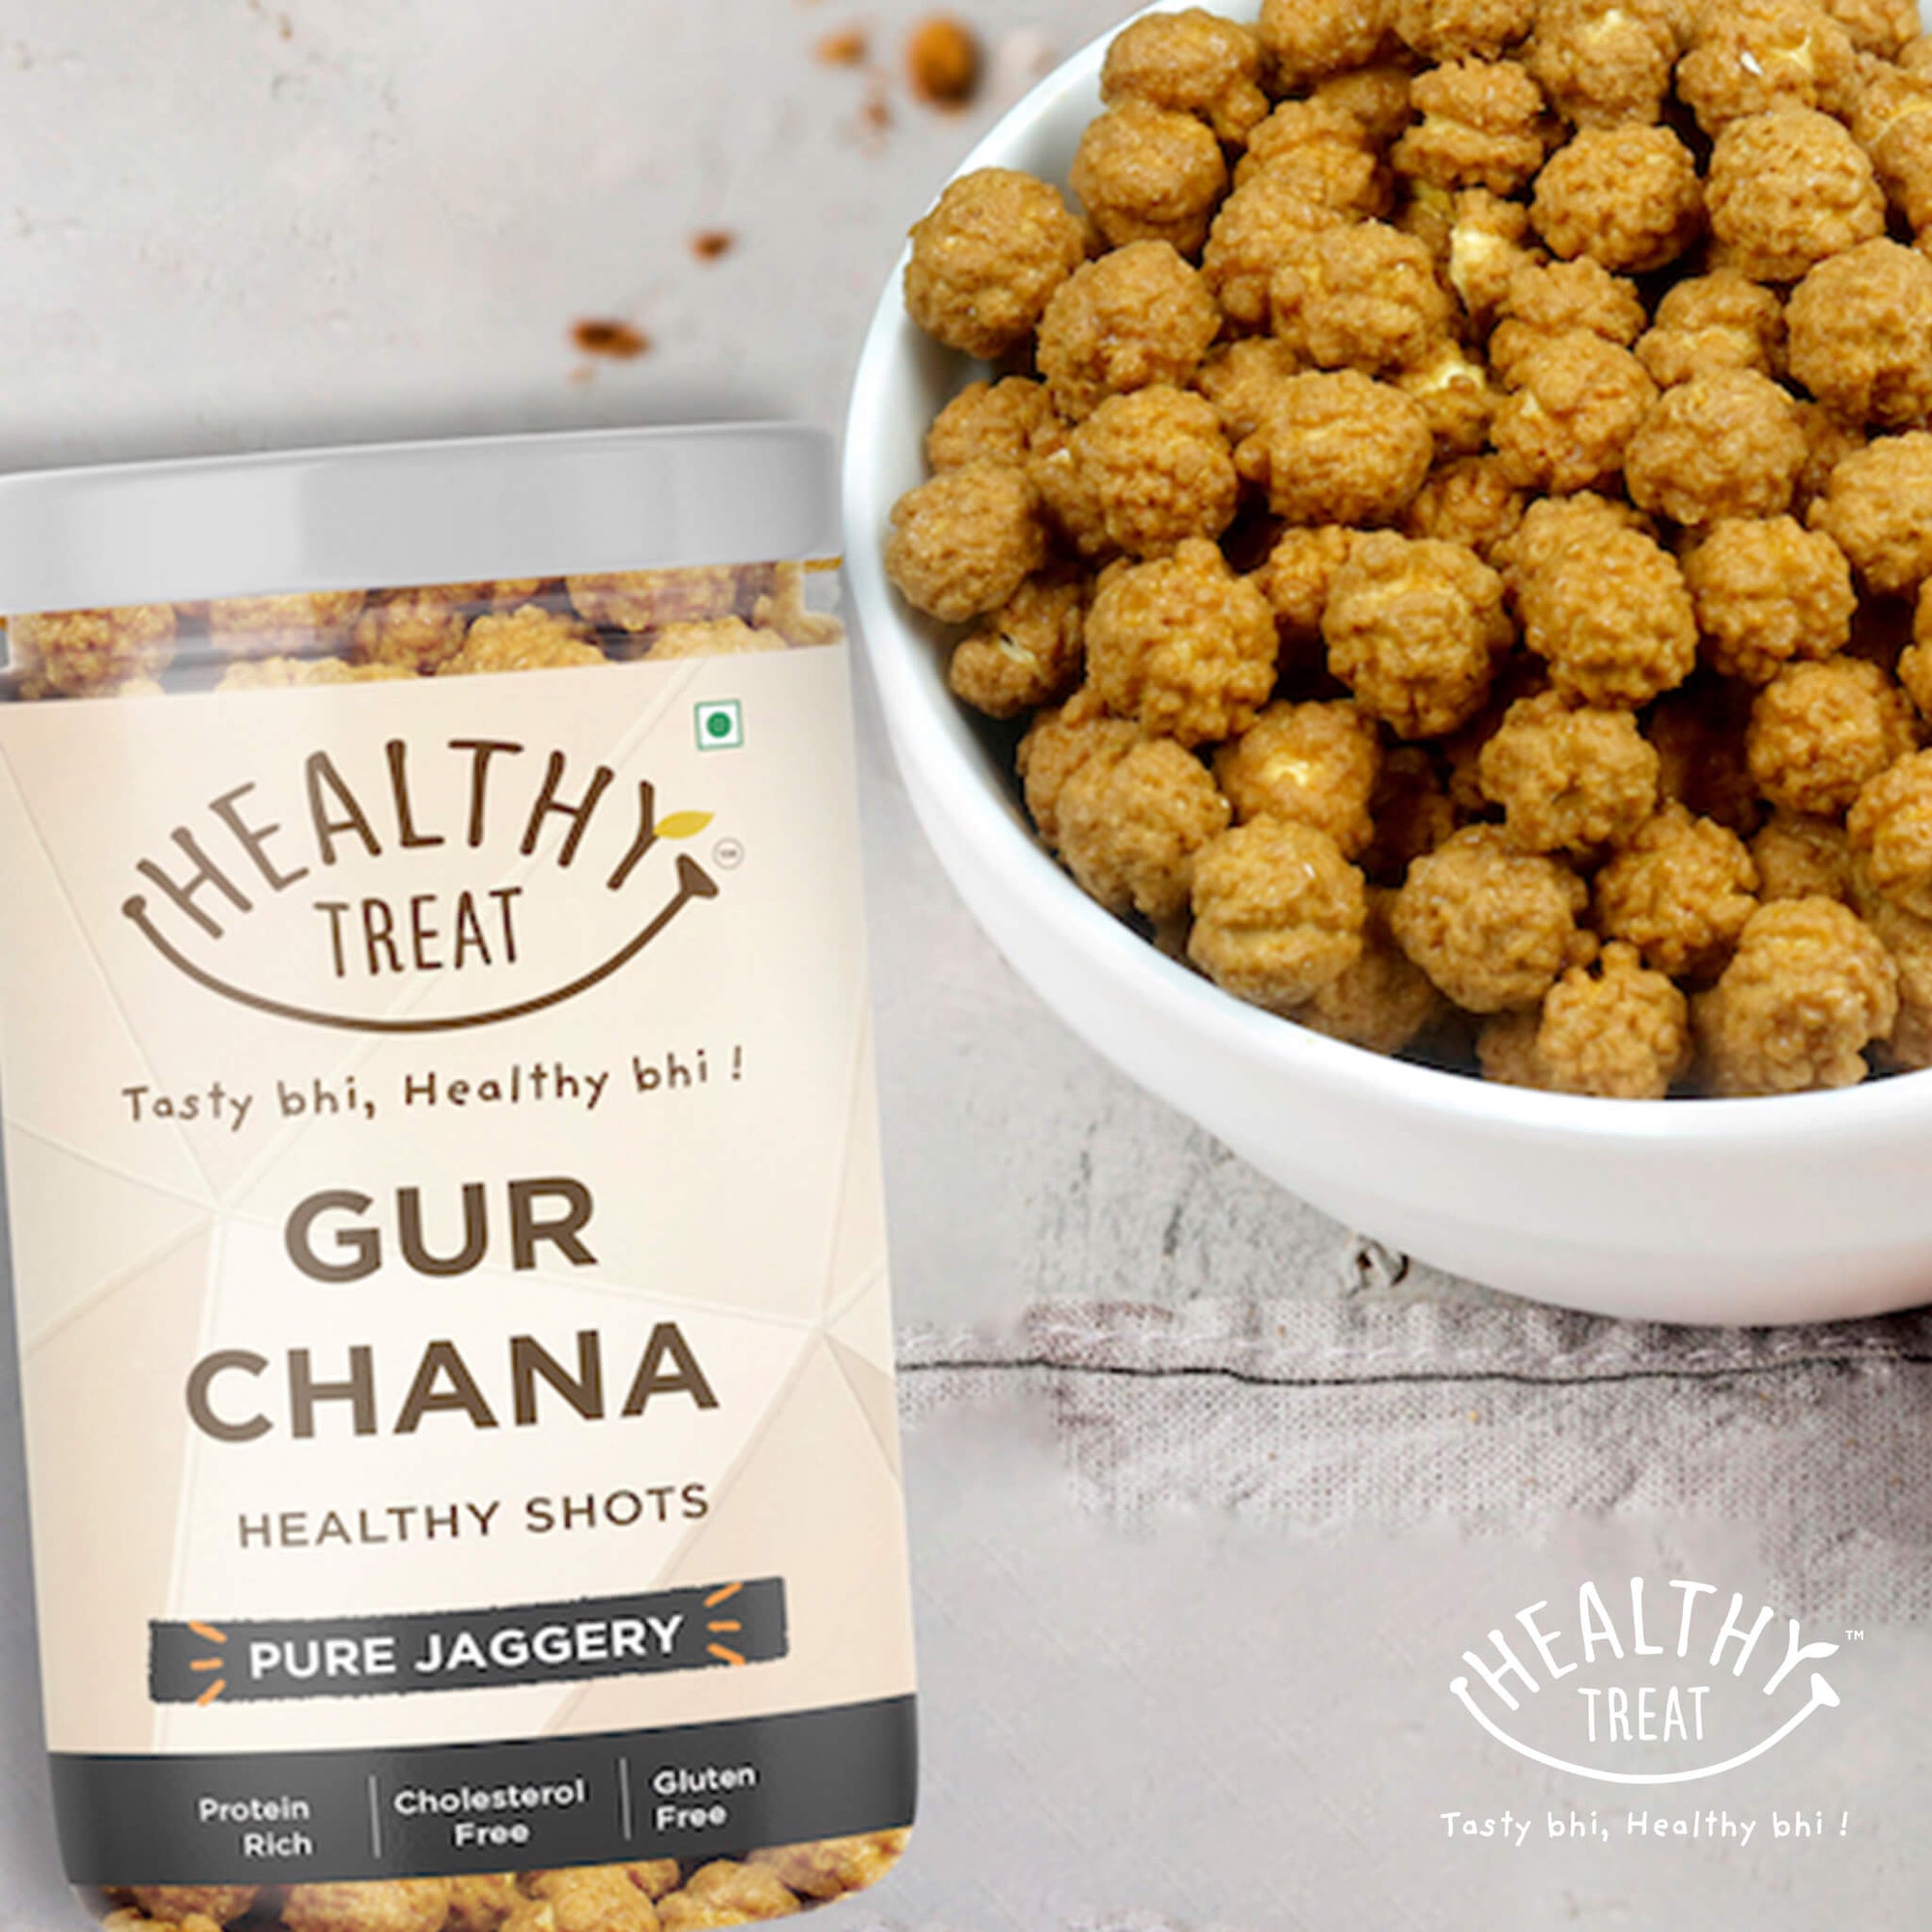 Healthy Treat Gur Chana or Roasted chickpeas with natural pure jaggery, these are healthy diabetic friendly immunity jaggery shots which are protein rich and full of nutrients.